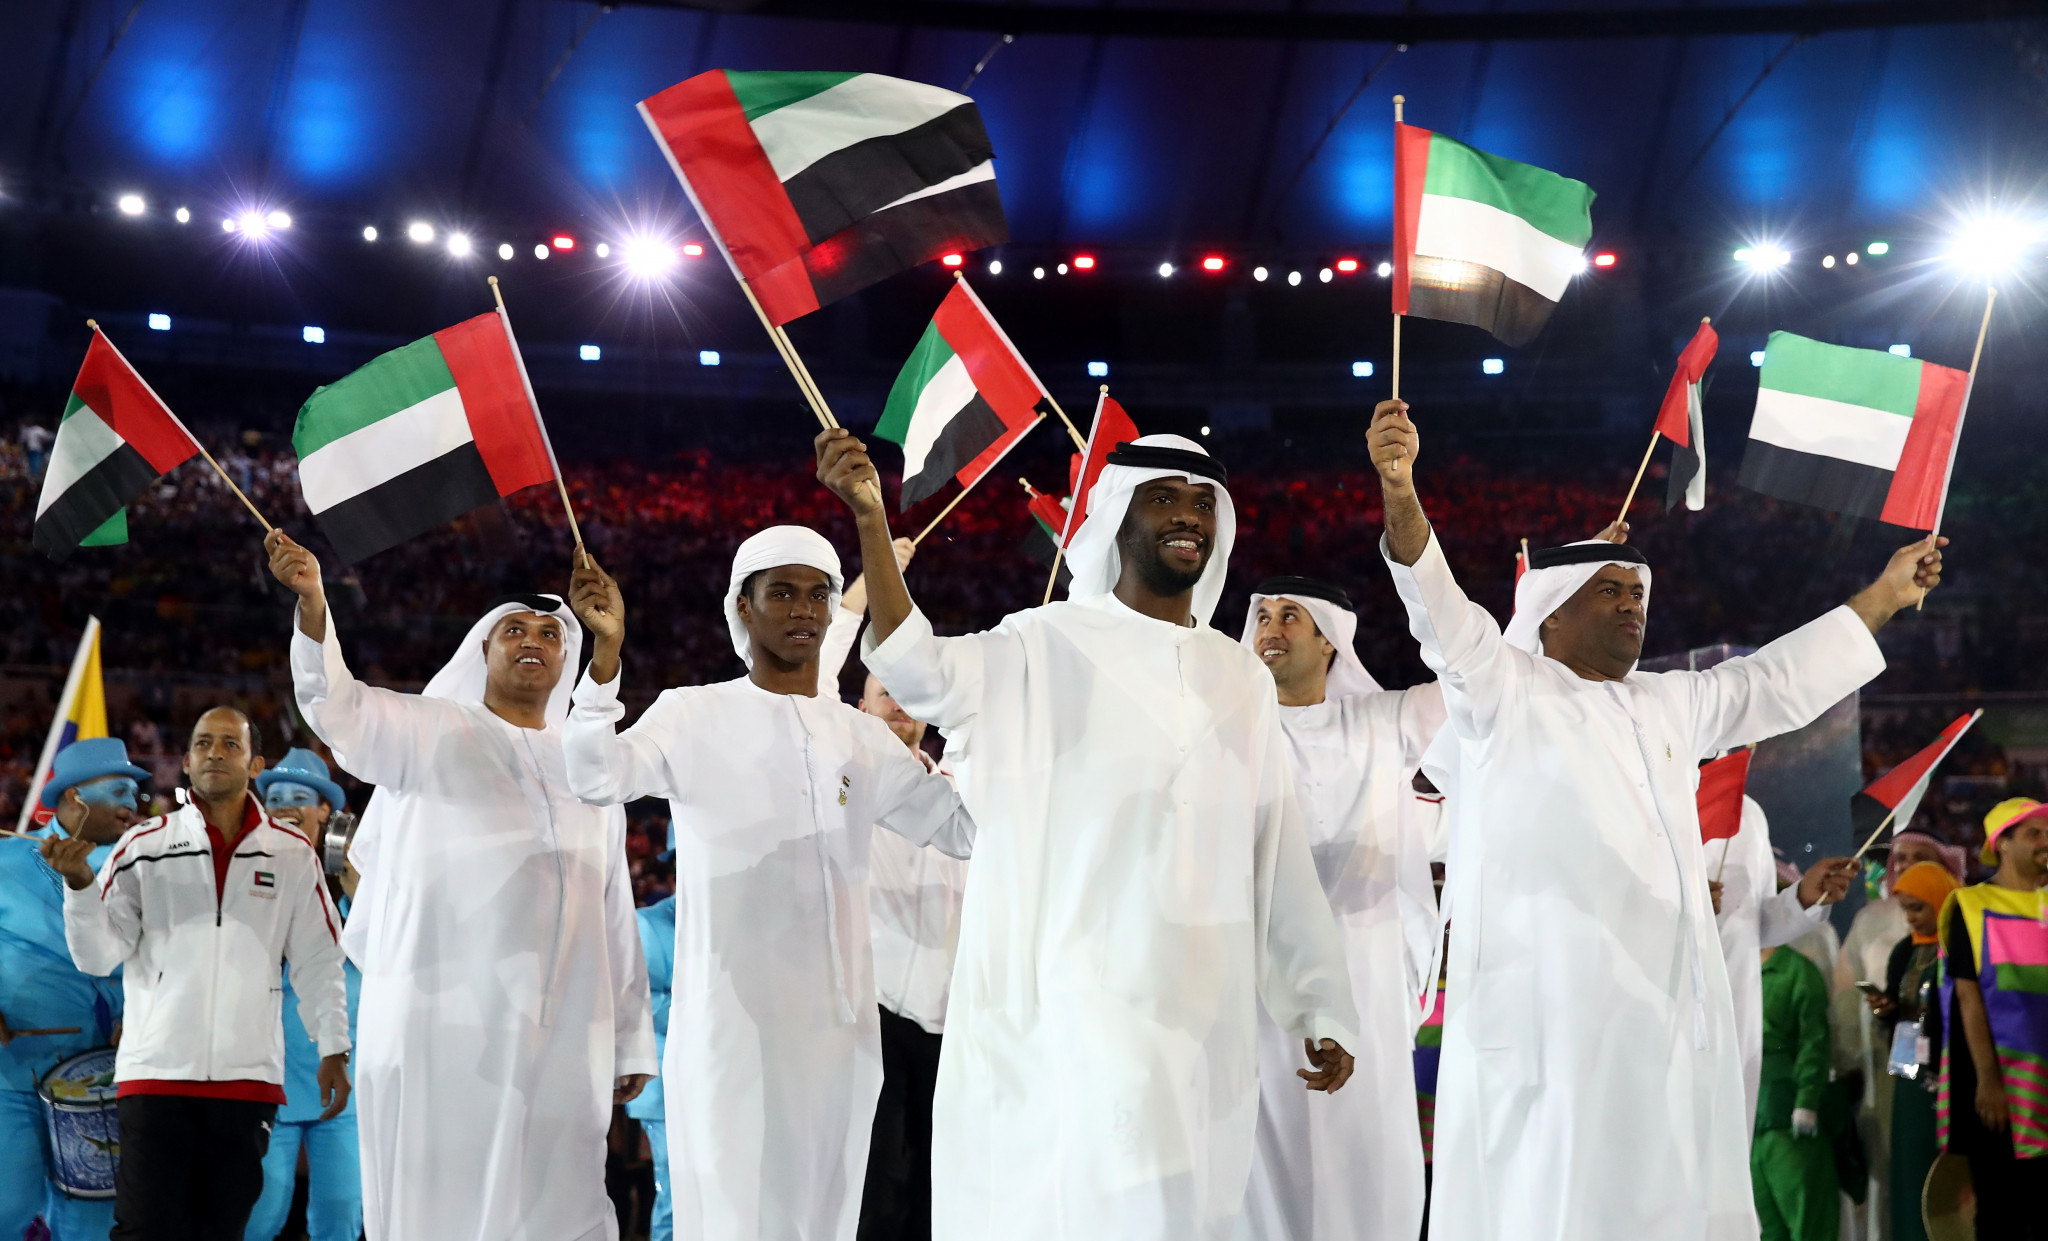 The UAE NOC has delayed elections until after Tokyo 2020 ©Getty Images